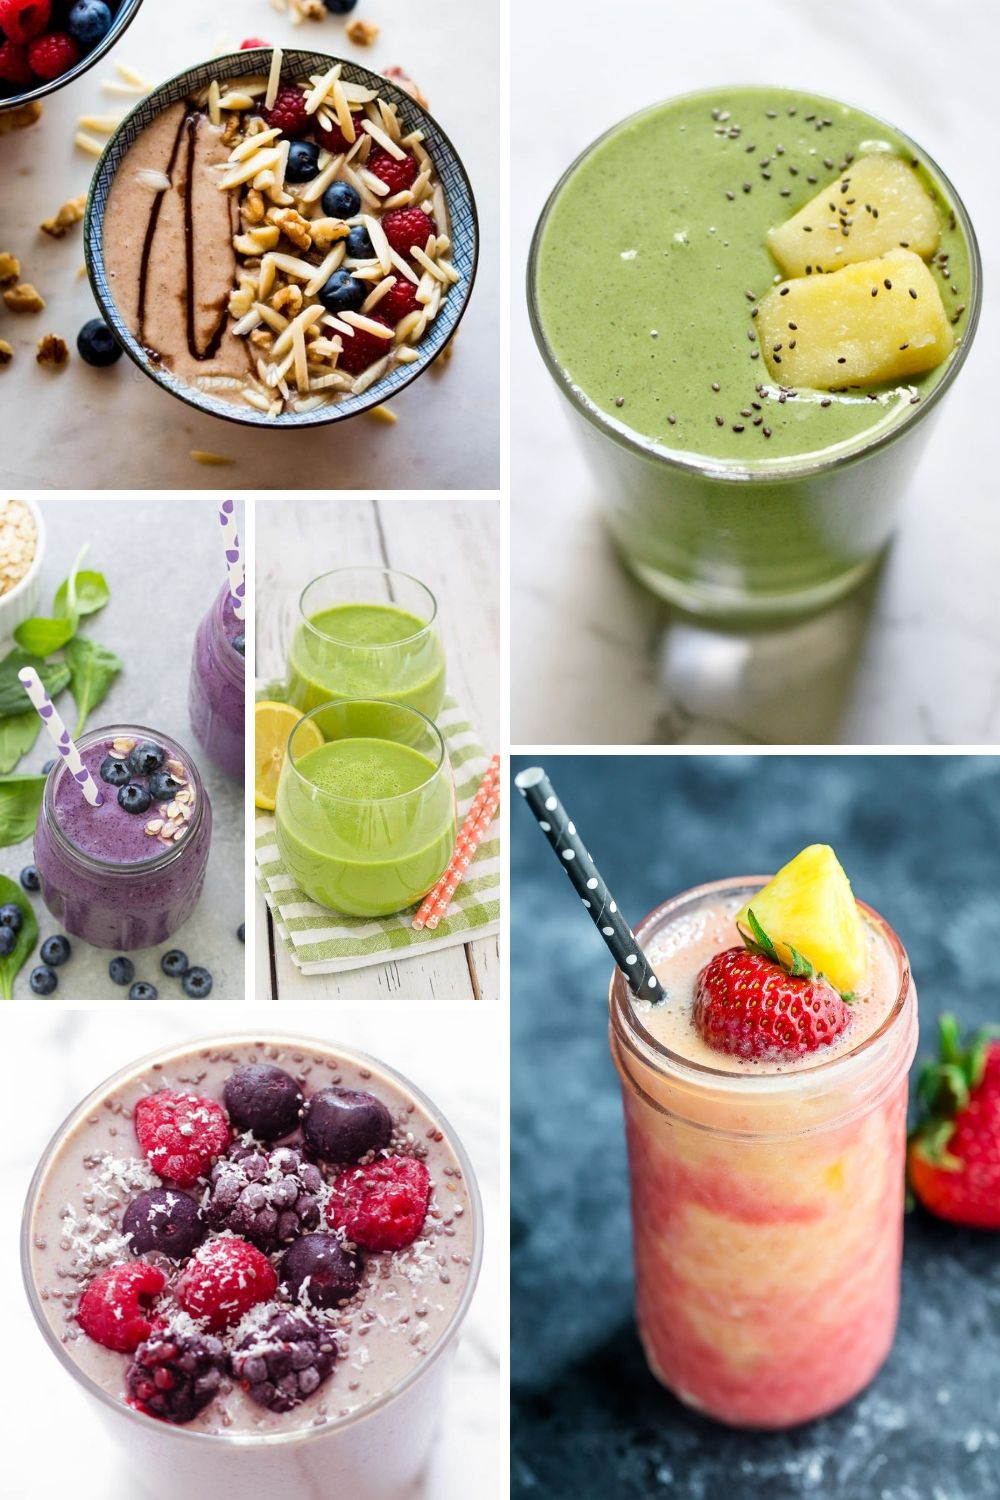 How to make a perfect smoothie